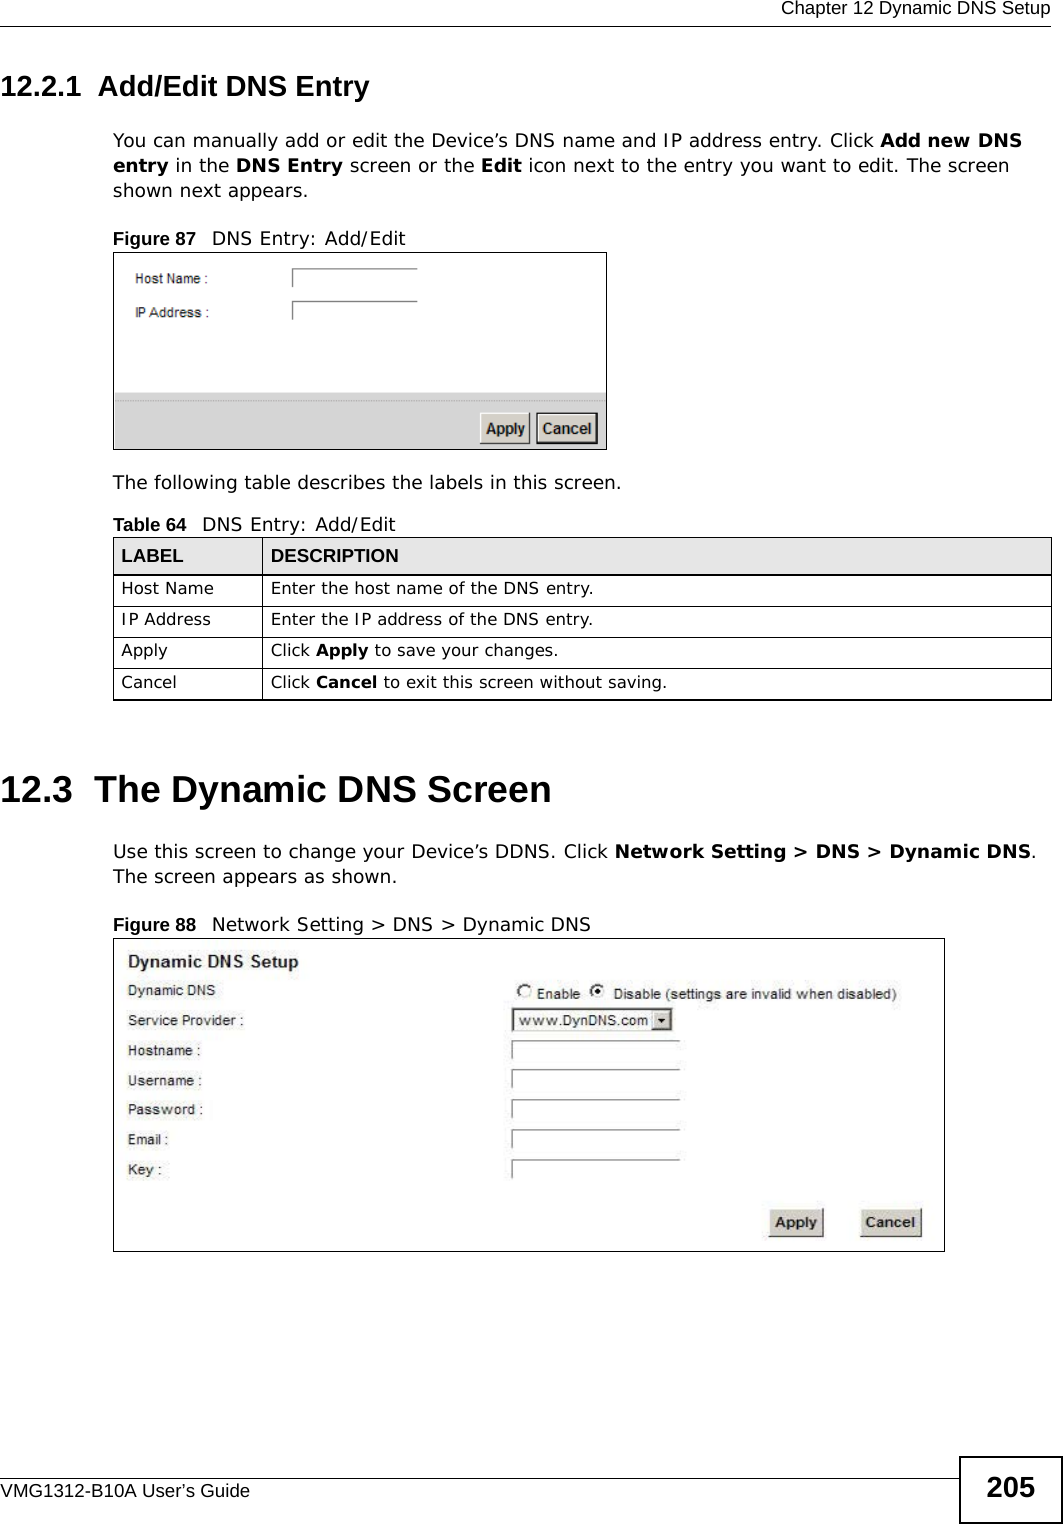  Chapter 12 Dynamic DNS SetupVMG1312-B10A User’s Guide 20512.2.1  Add/Edit DNS EntryYou can manually add or edit the Device’s DNS name and IP address entry. Click Add new DNS entry in the DNS Entry screen or the Edit icon next to the entry you want to edit. The screen shown next appears.Figure 87   DNS Entry: Add/EditThe following table describes the labels in this screen. 12.3  The Dynamic DNS ScreenUse this screen to change your Device’s DDNS. Click Network Setting &gt; DNS &gt; Dynamic DNS. The screen appears as shown.Figure 88   Network Setting &gt; DNS &gt; Dynamic DNSTable 64   DNS Entry: Add/EditLABEL DESCRIPTIONHost Name Enter the host name of the DNS entry.IP Address Enter the IP address of the DNS entry.Apply Click Apply to save your changes.Cancel Click Cancel to exit this screen without saving.